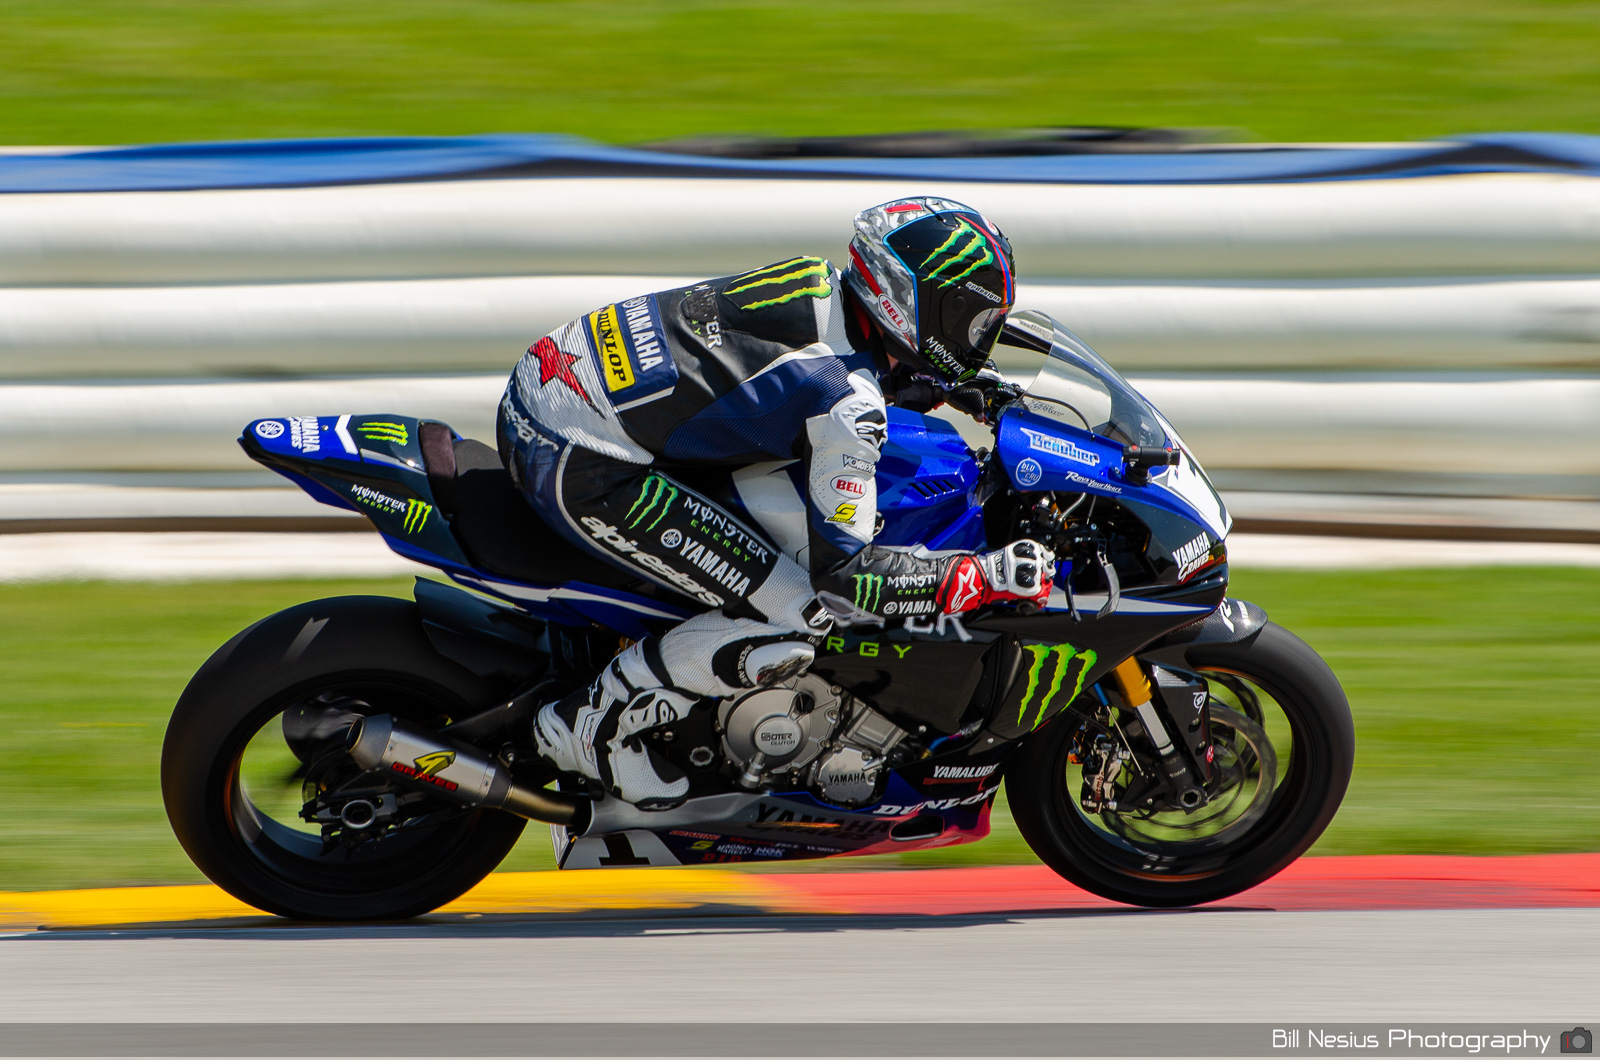 Cameron Beaubier on the Number 1 Monster Energy Graves Yamaha R1 / DSC_5504 / 3